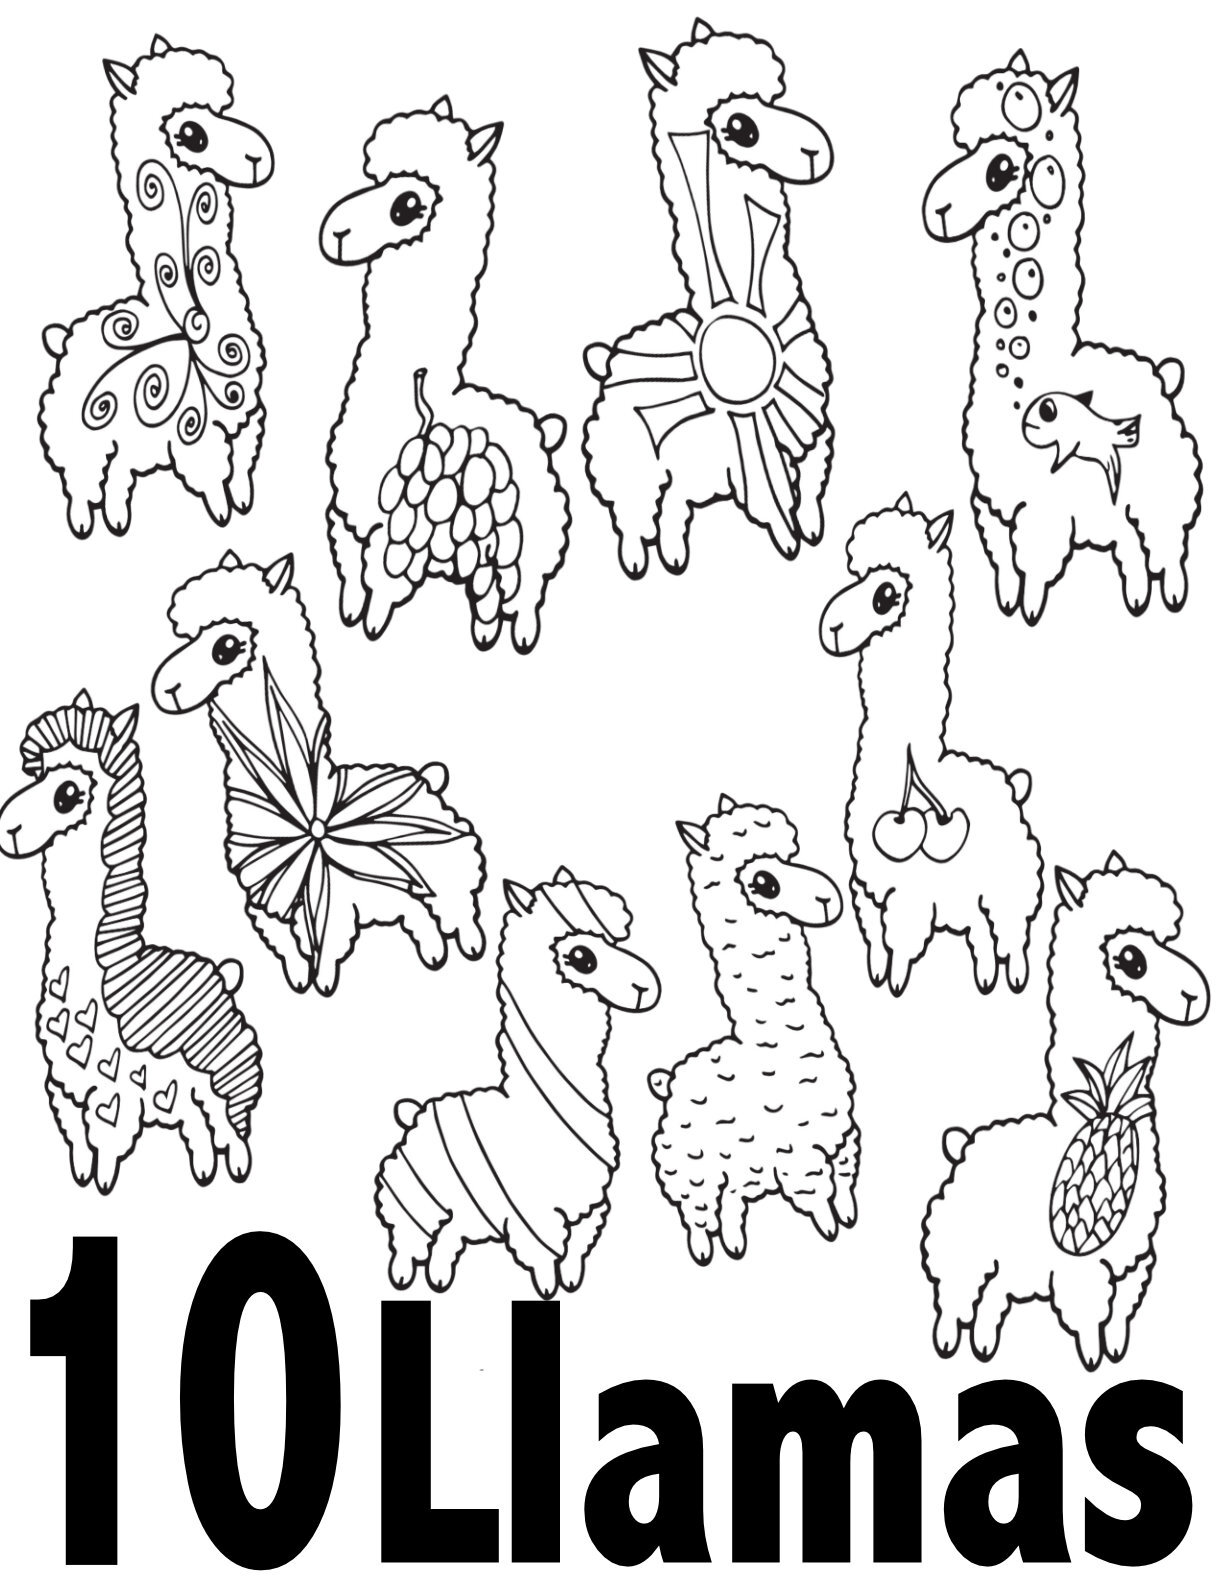 Llama Number Coloring Pages Collection 1-10 - Free Preschool/Kindergarten Printable - Number 10CLICK TO DOWNLOAD THE 10 LLAMA PAGE ONLY